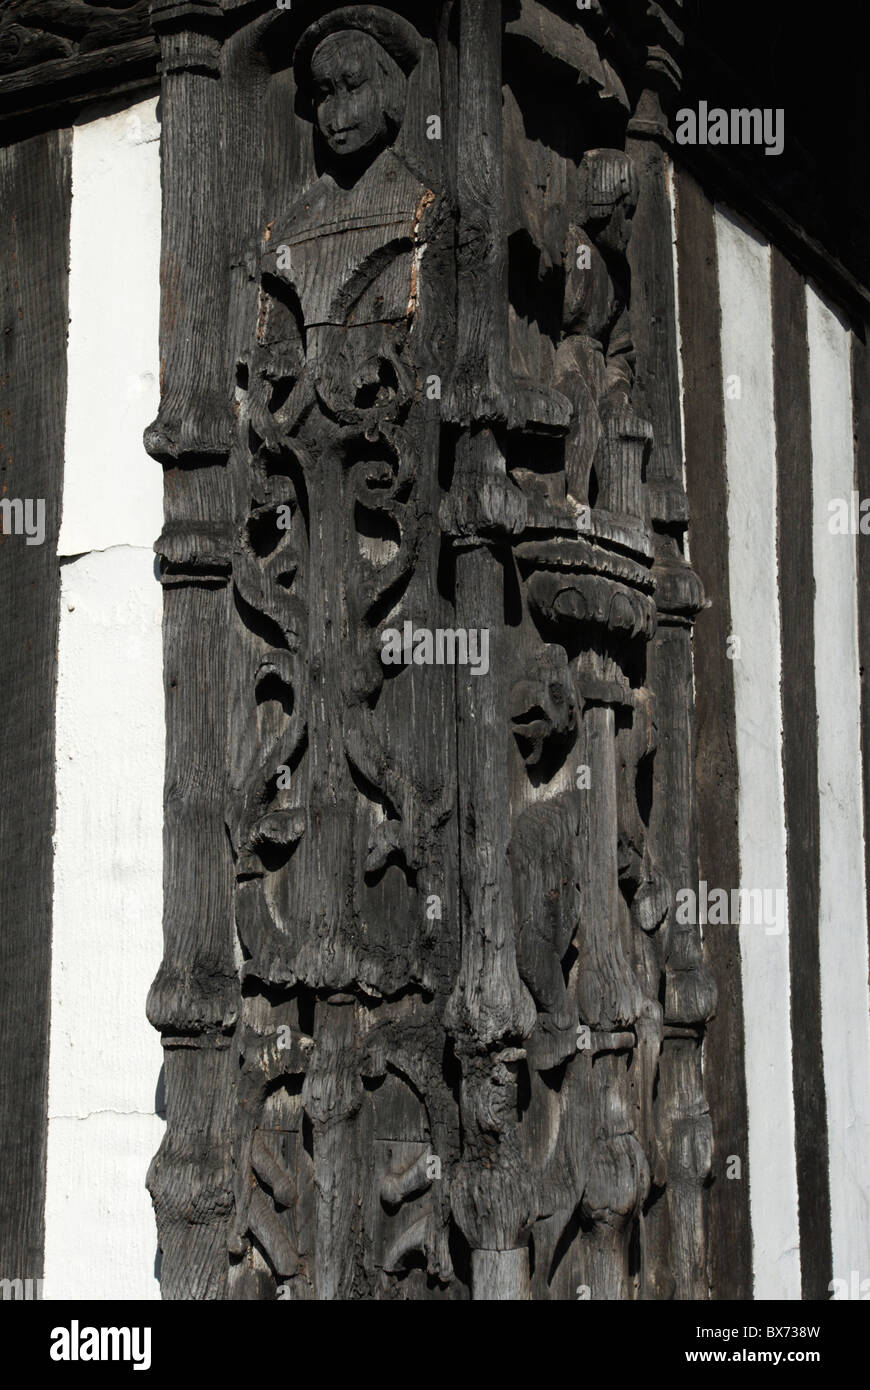 Wood carving on an medieval building Ipswich United Kingdom Stock Photo